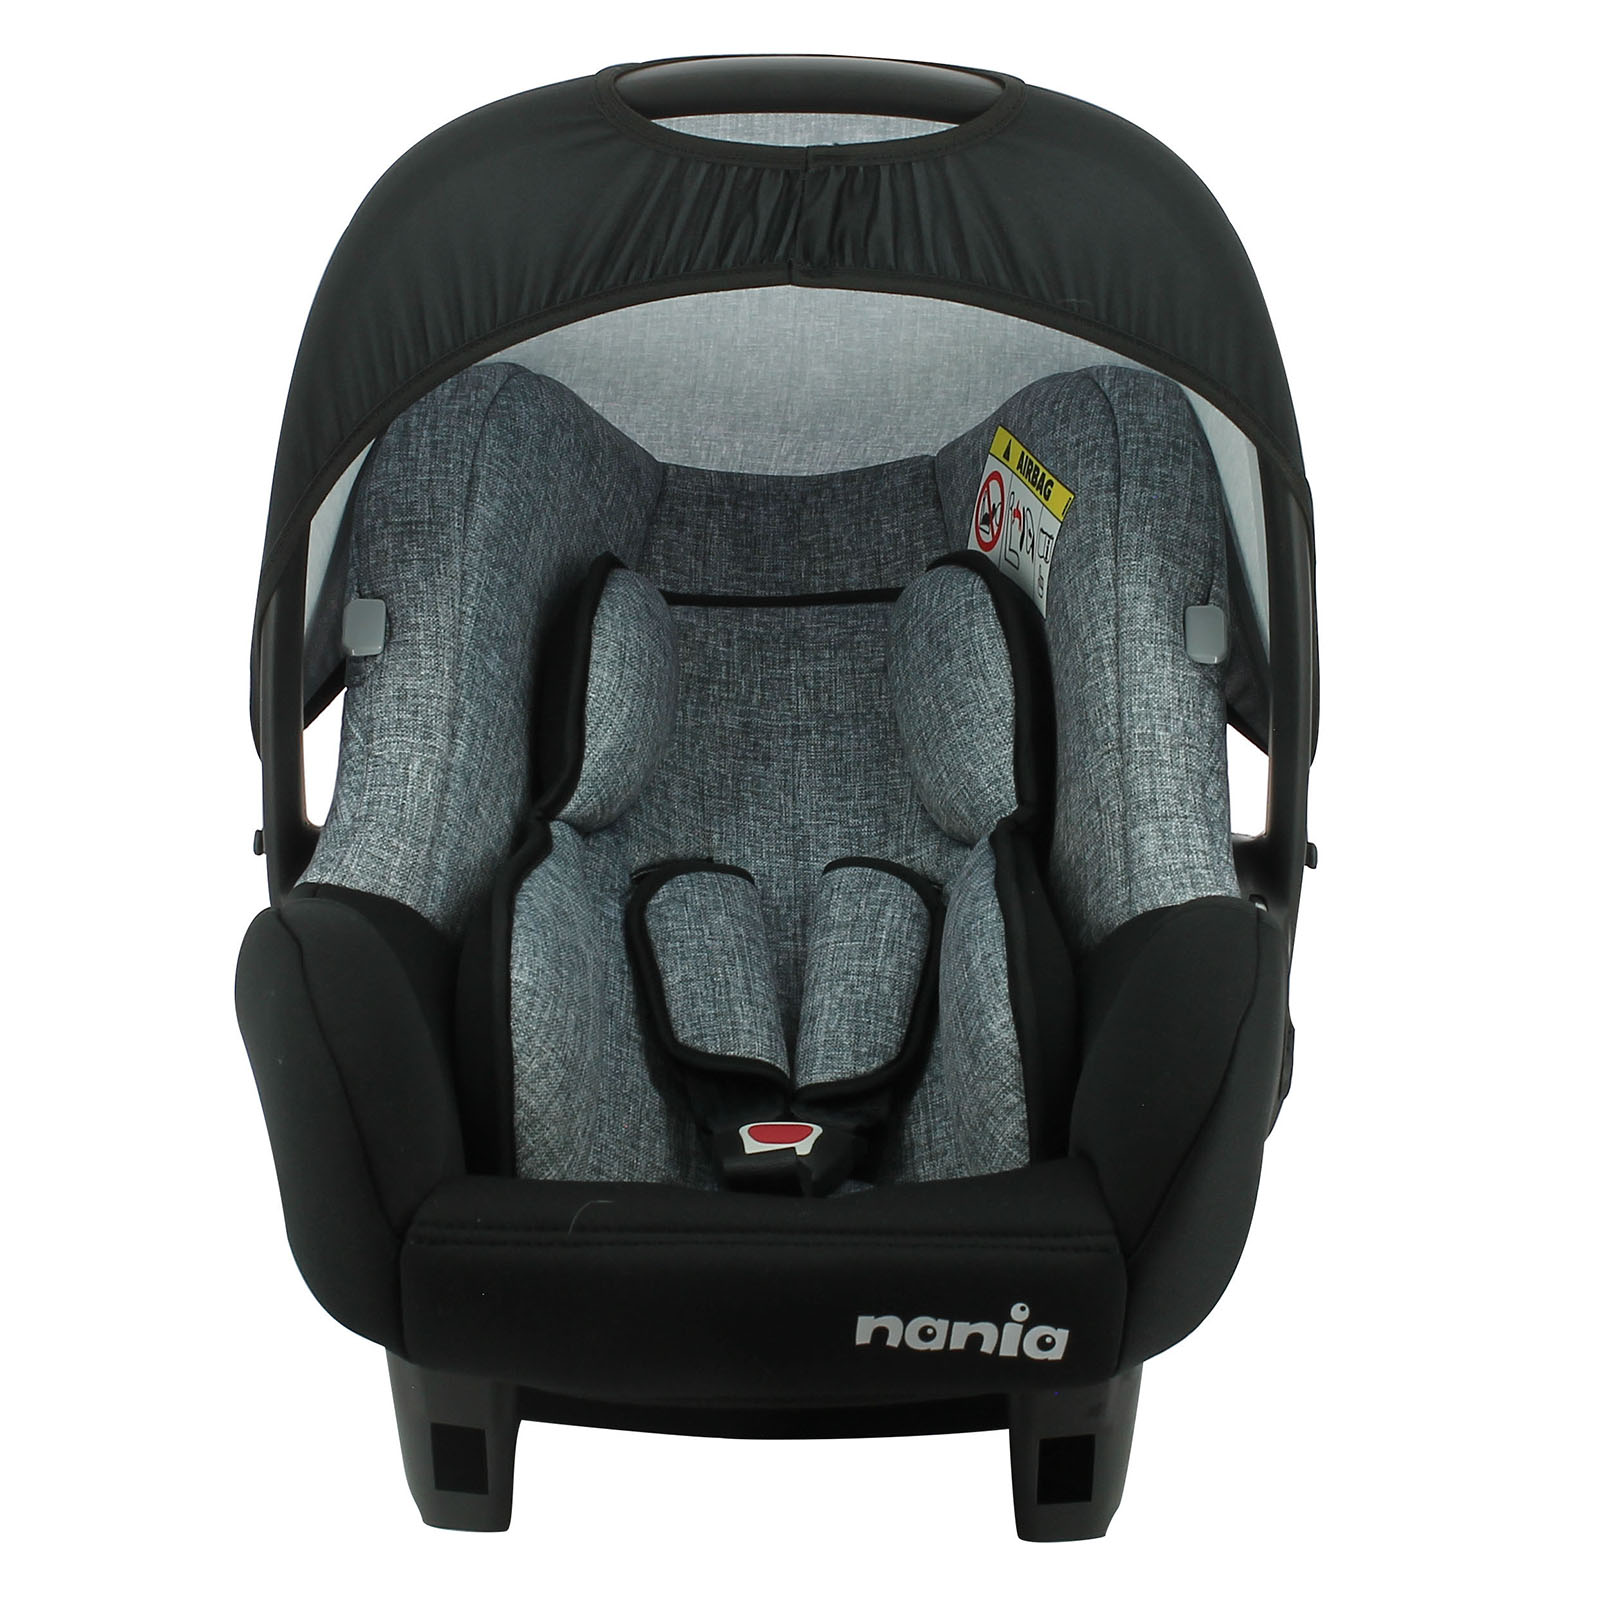 Nania Beone SP Luxe Silver Group 0+ Infant Carrier Car Seat - Black/Grey (0-15 Months)